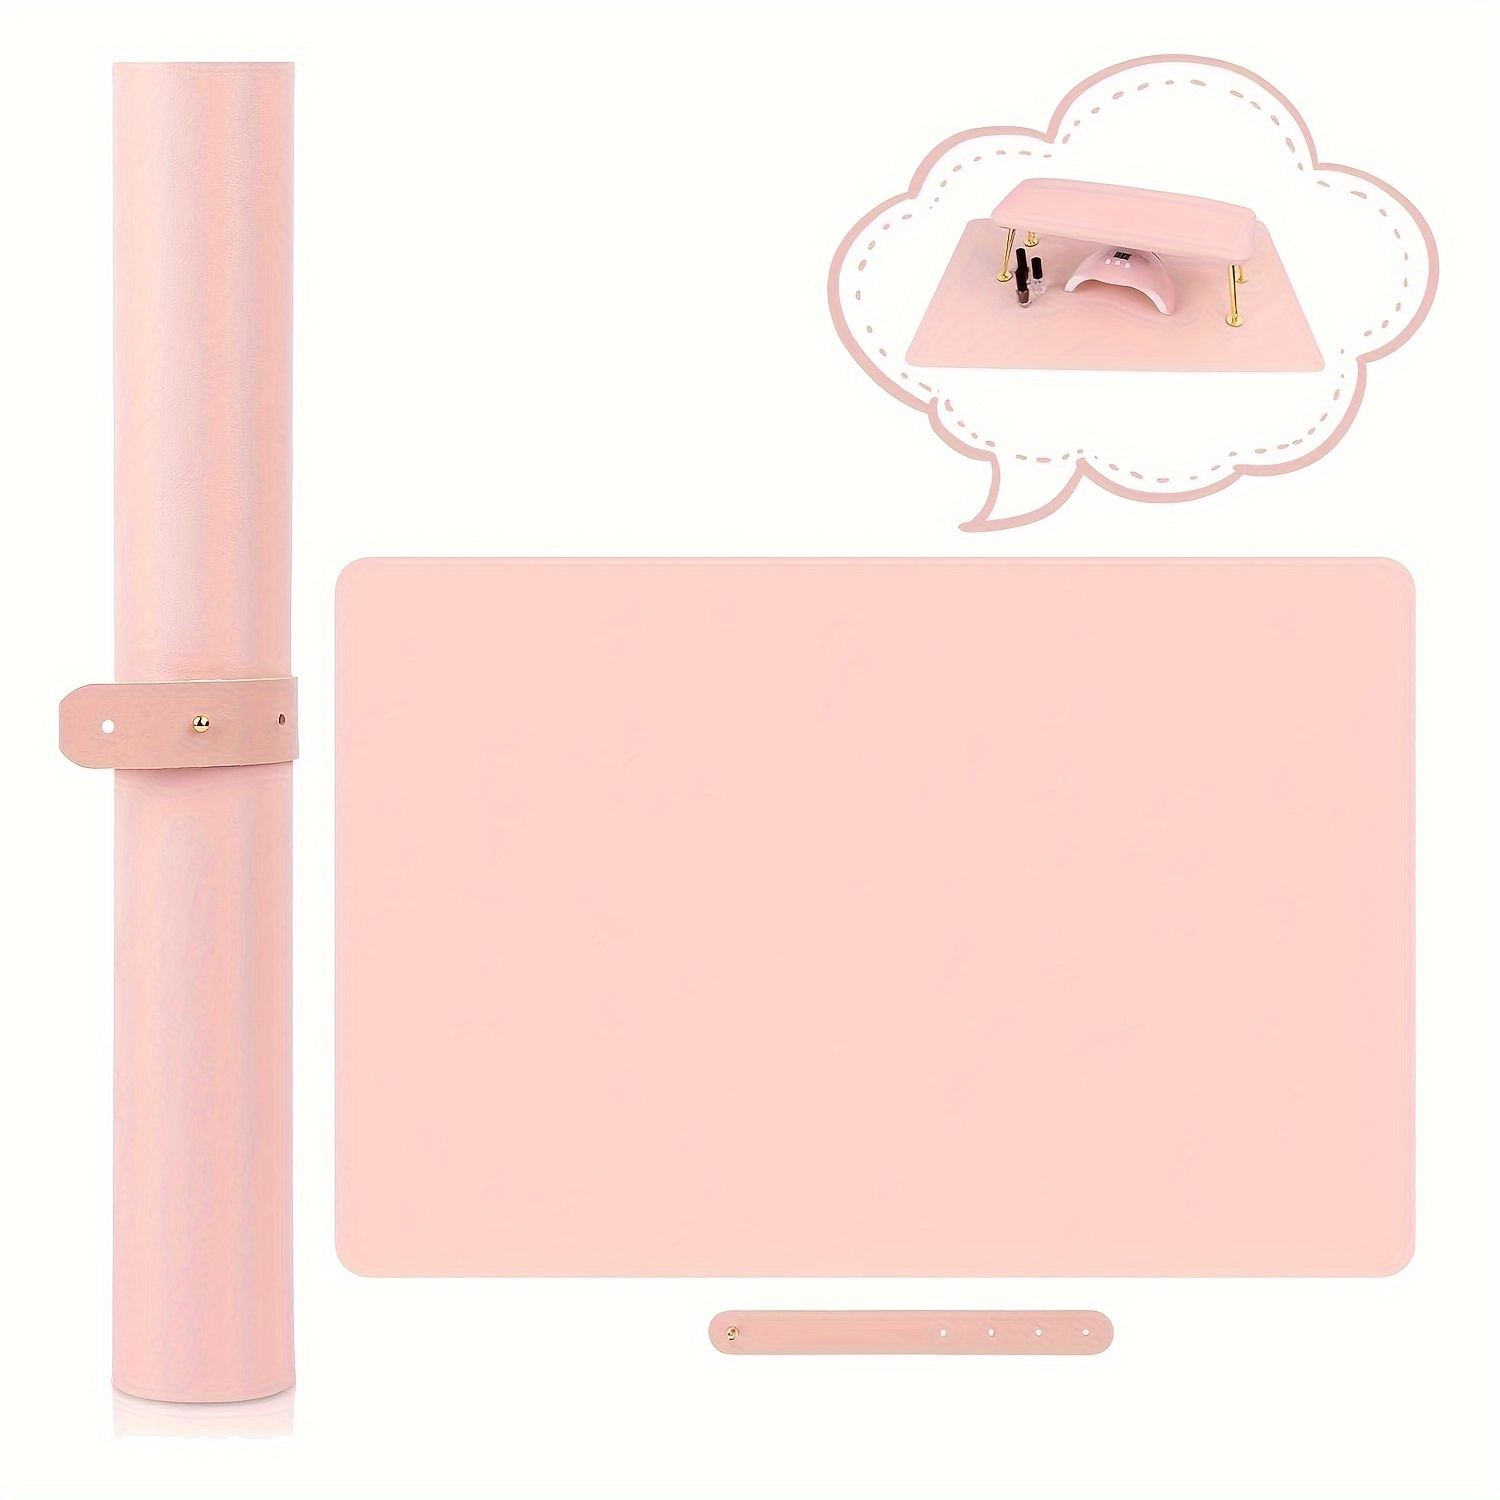 

Large Pink Professional Nail Art Mat - Portable, Anti-slip, Scratch-resistant, Thickened Design Hand Rest For Nail Salons - Premium Microfiber Leather Manicure Pad - Unscented